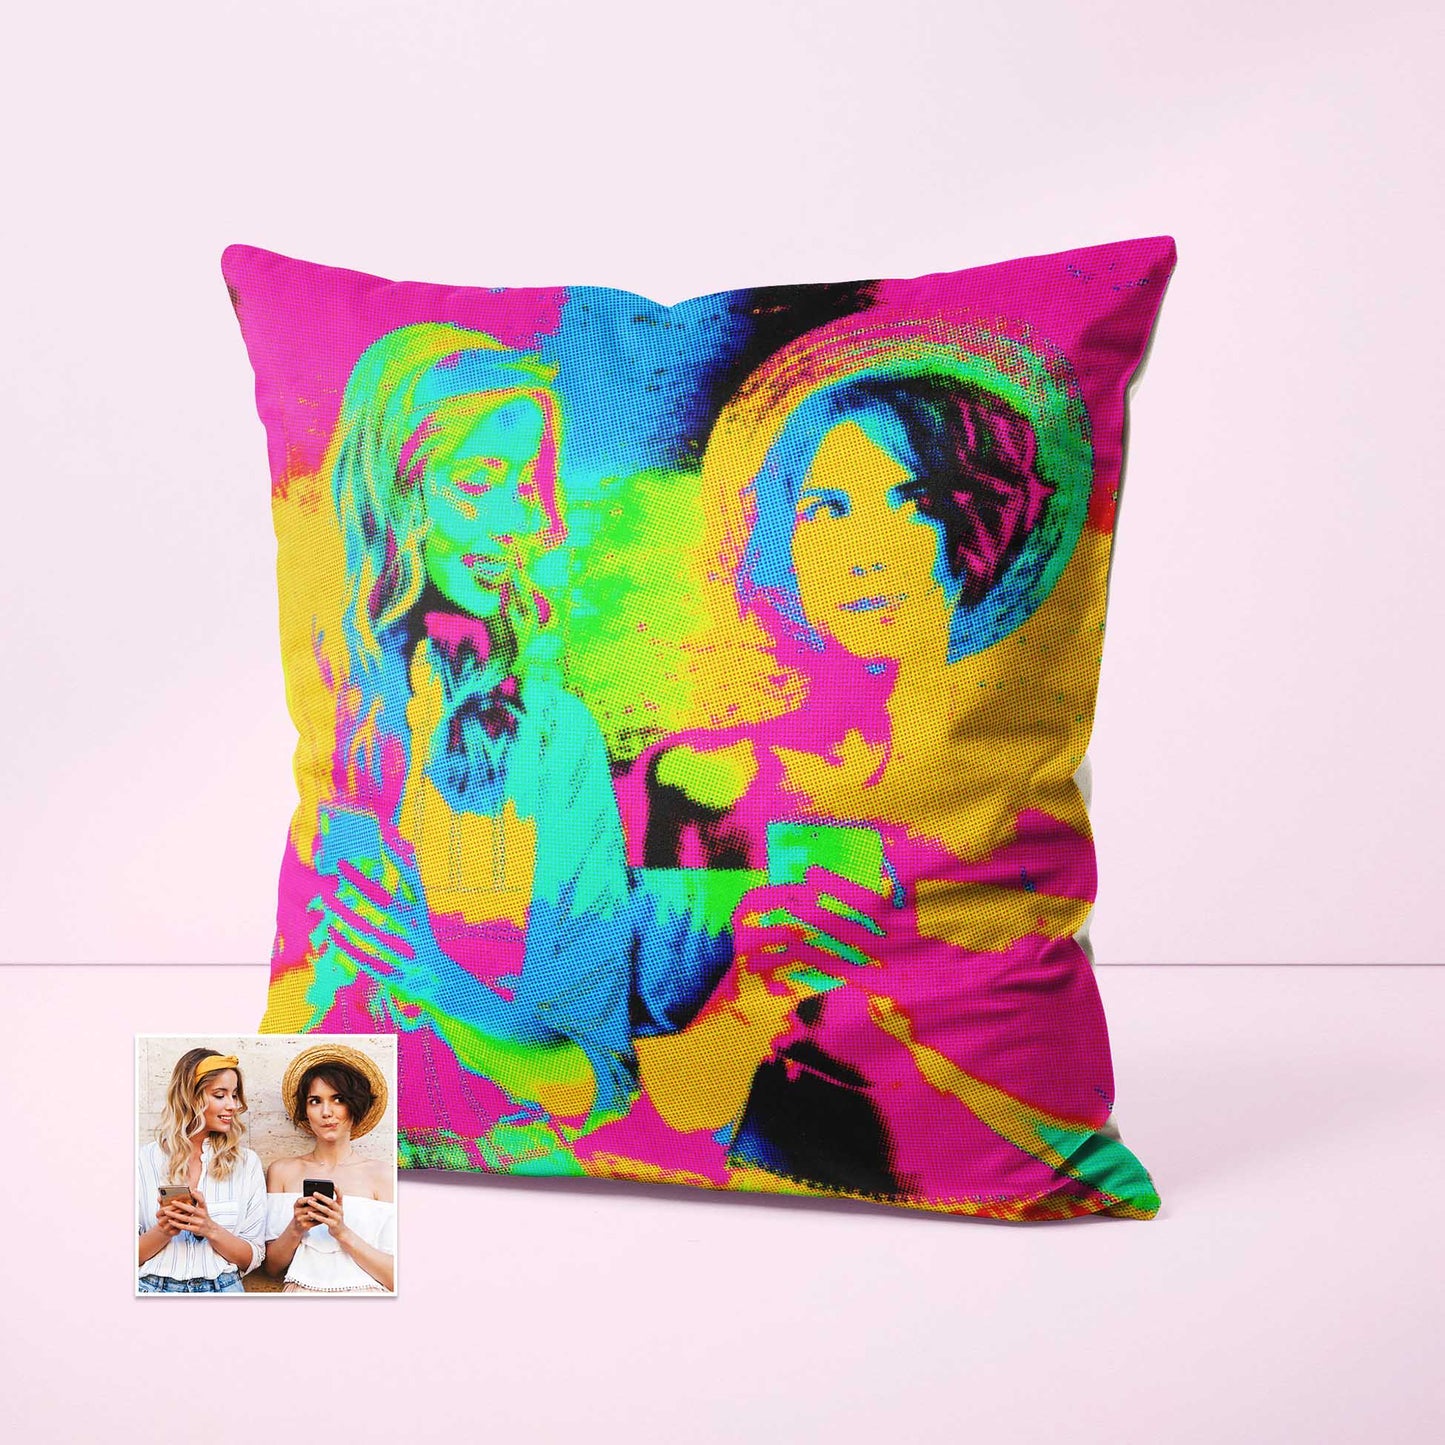 Elevate your home decor with the Personalised Pop Art Cushion, a unique and original piece that showcases your creativity. Printed from your photo, it brings a quirky and imaginative touch to any interior design. Handmade with soft velvet